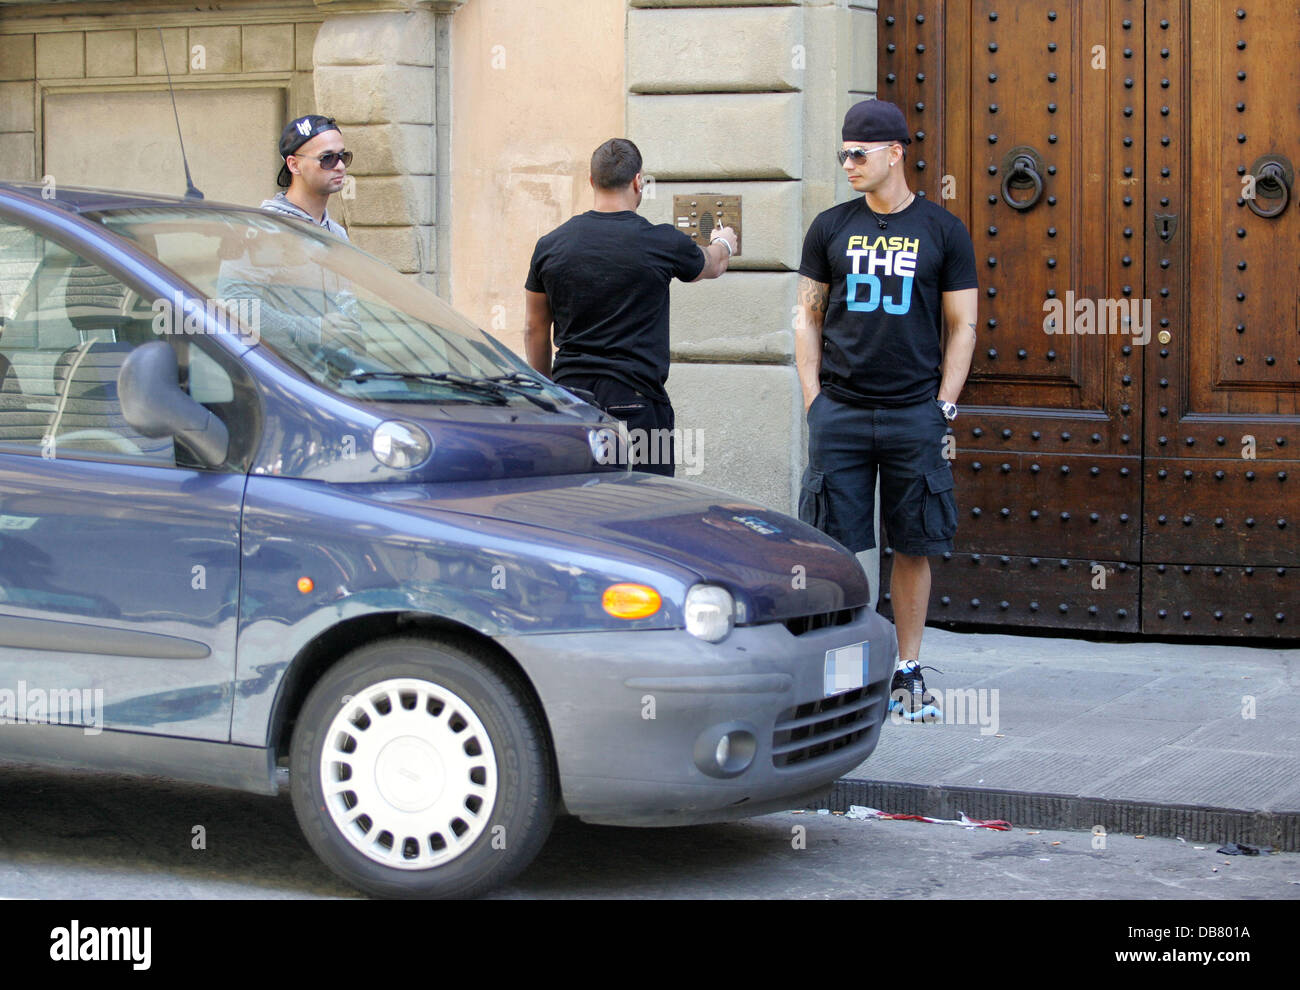 Mike 'The Situation' Sorrentino, Ronnie Ortiz-Magrot and DJ Pauly D, real name Paul DelVecchio leaving the 'Jersey Shore' apartment to go for a drive around Florence Florence, Italy - 15.05.11 Stock Photo